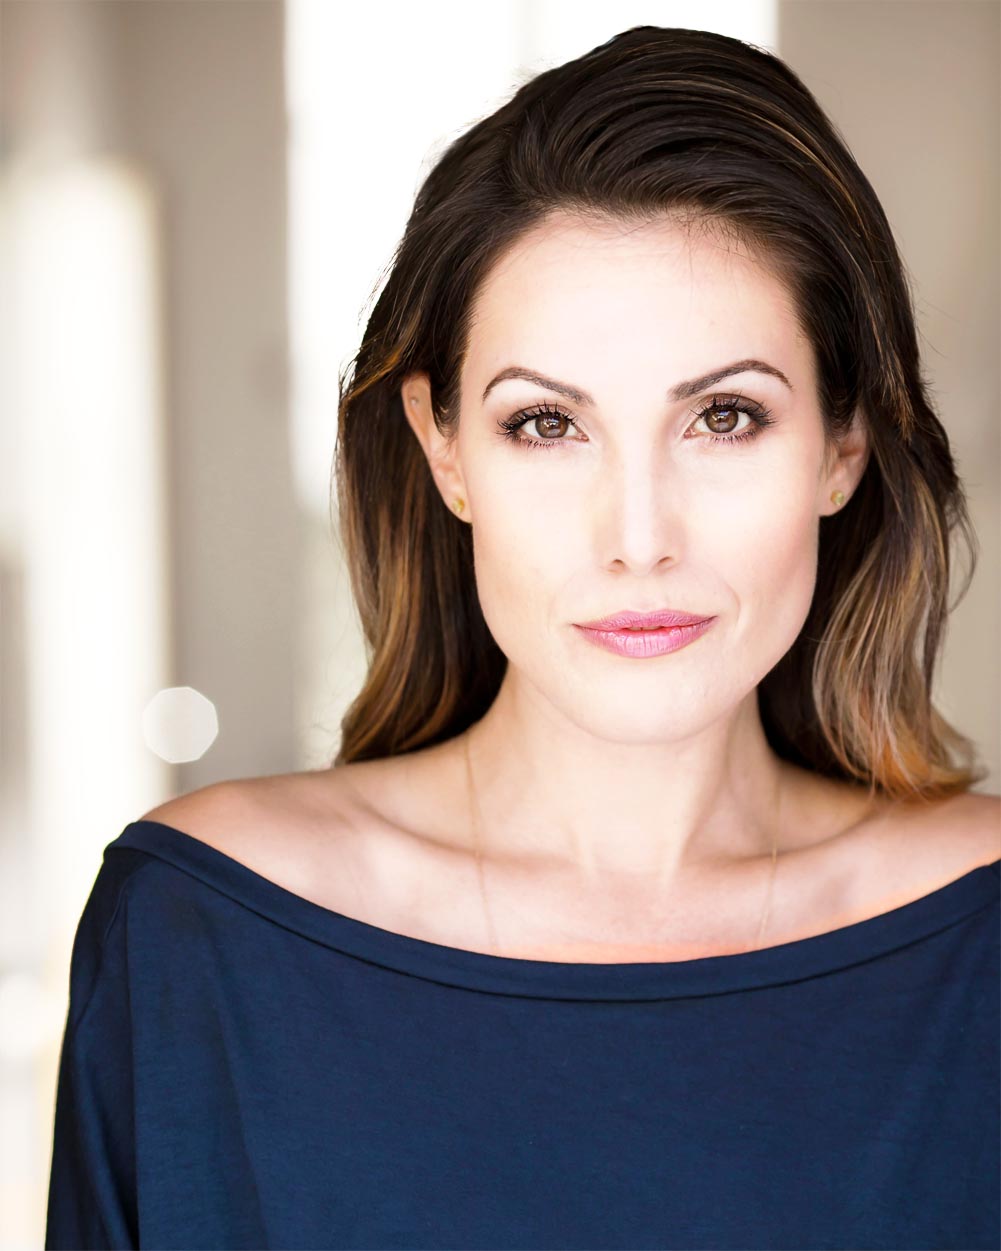 Carly Pope